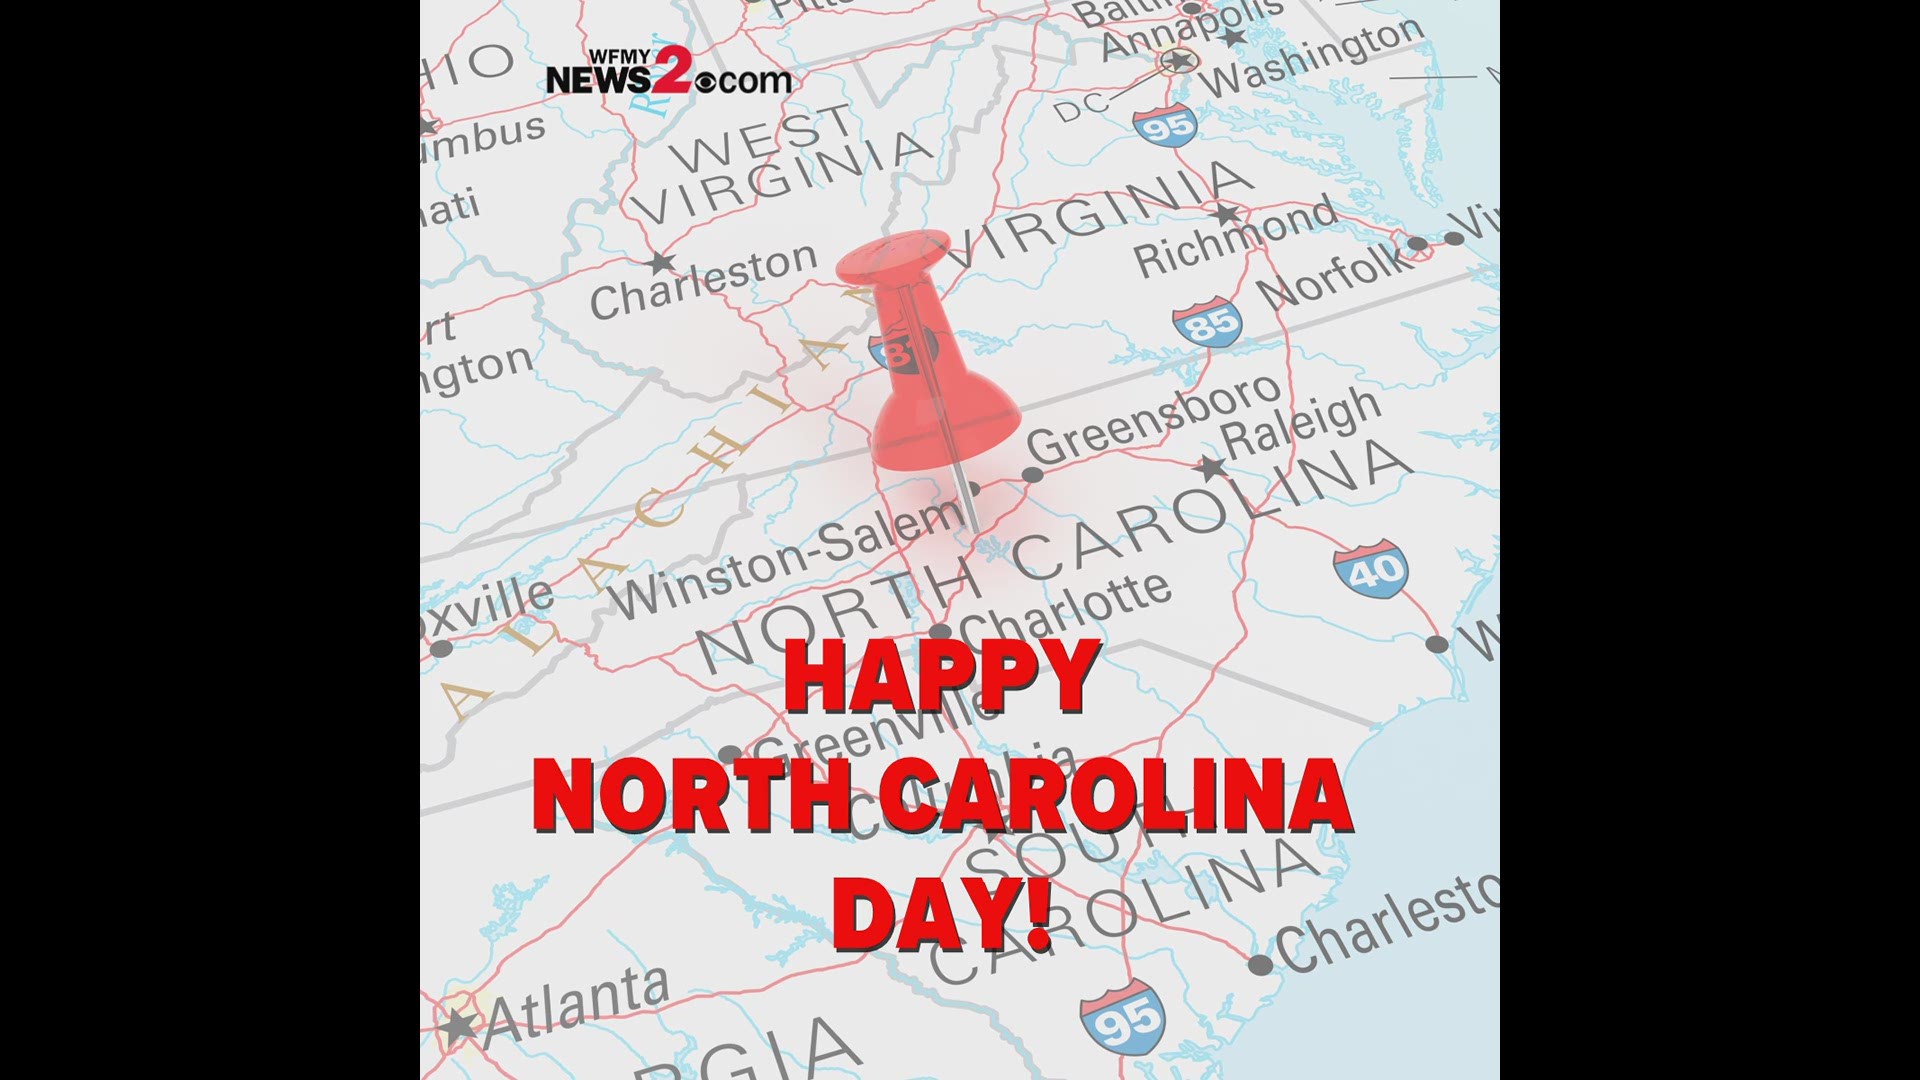 Cheerwine, barbecue, the Carolina Panthers, our Veteran Community, the Outer Banks... There are so many things to love about the Tar Heel State!